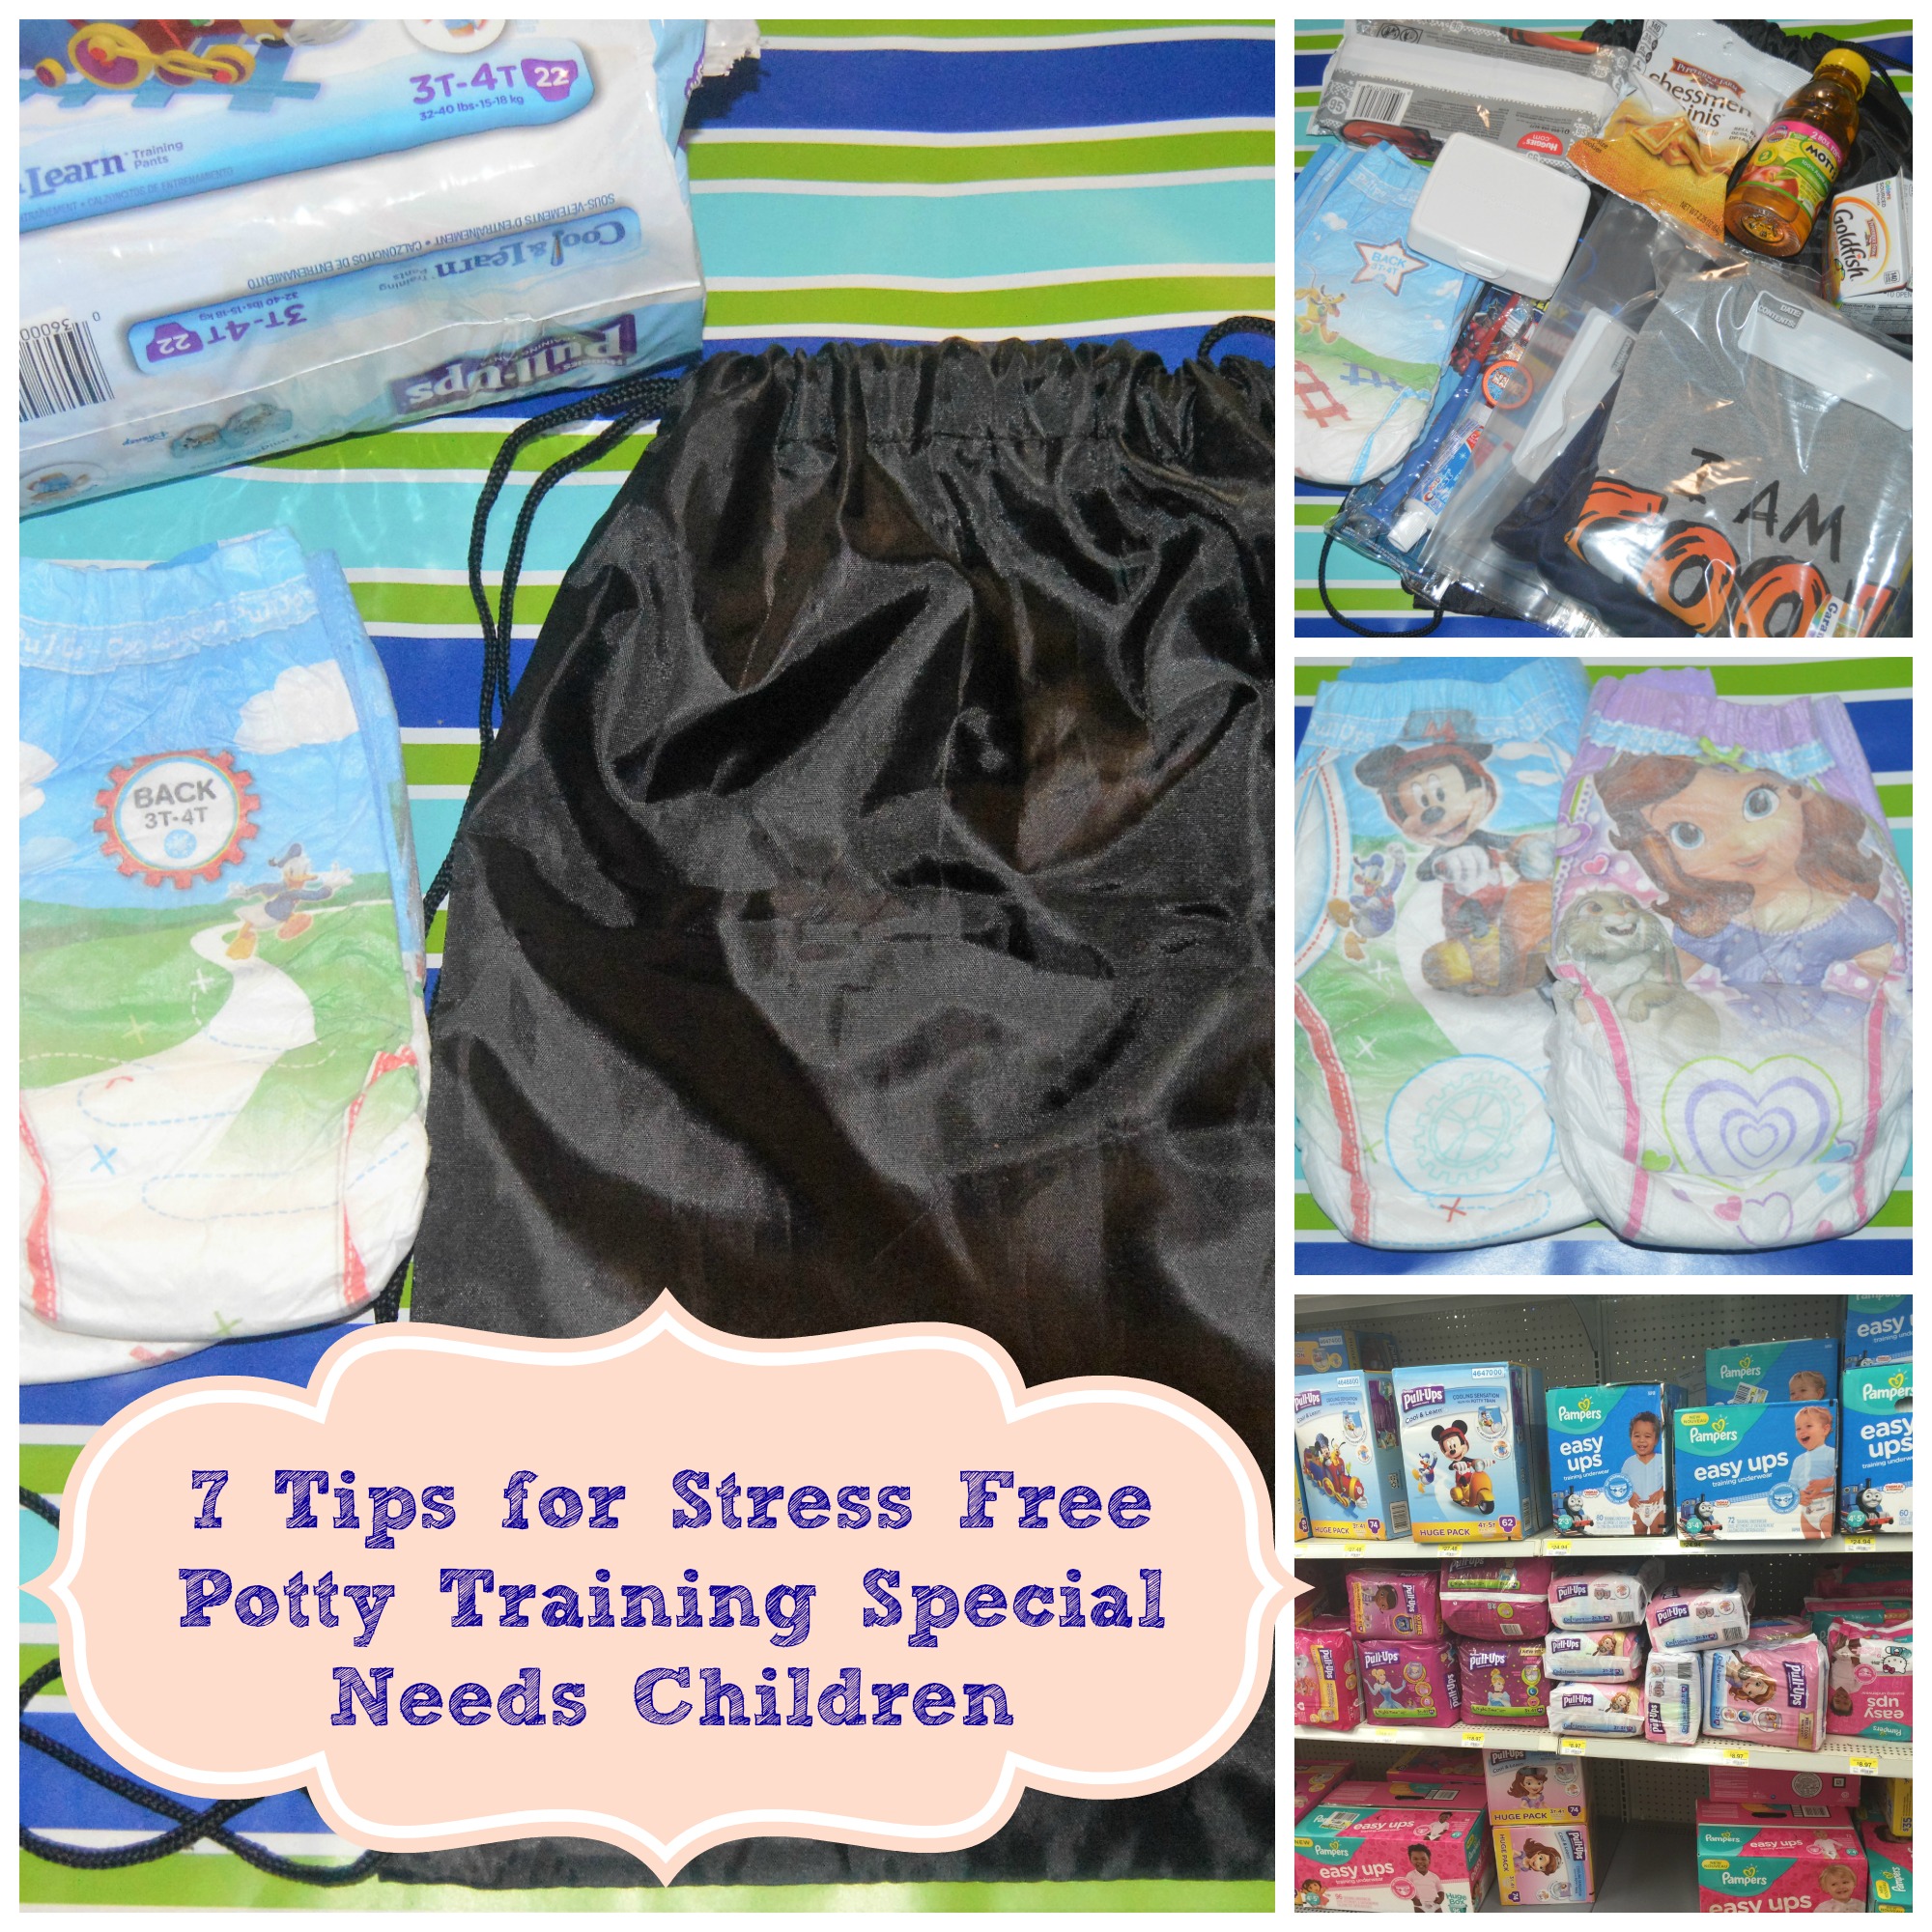 7 Tips for Stress-Free Potty Training Special Needs Children #ad #